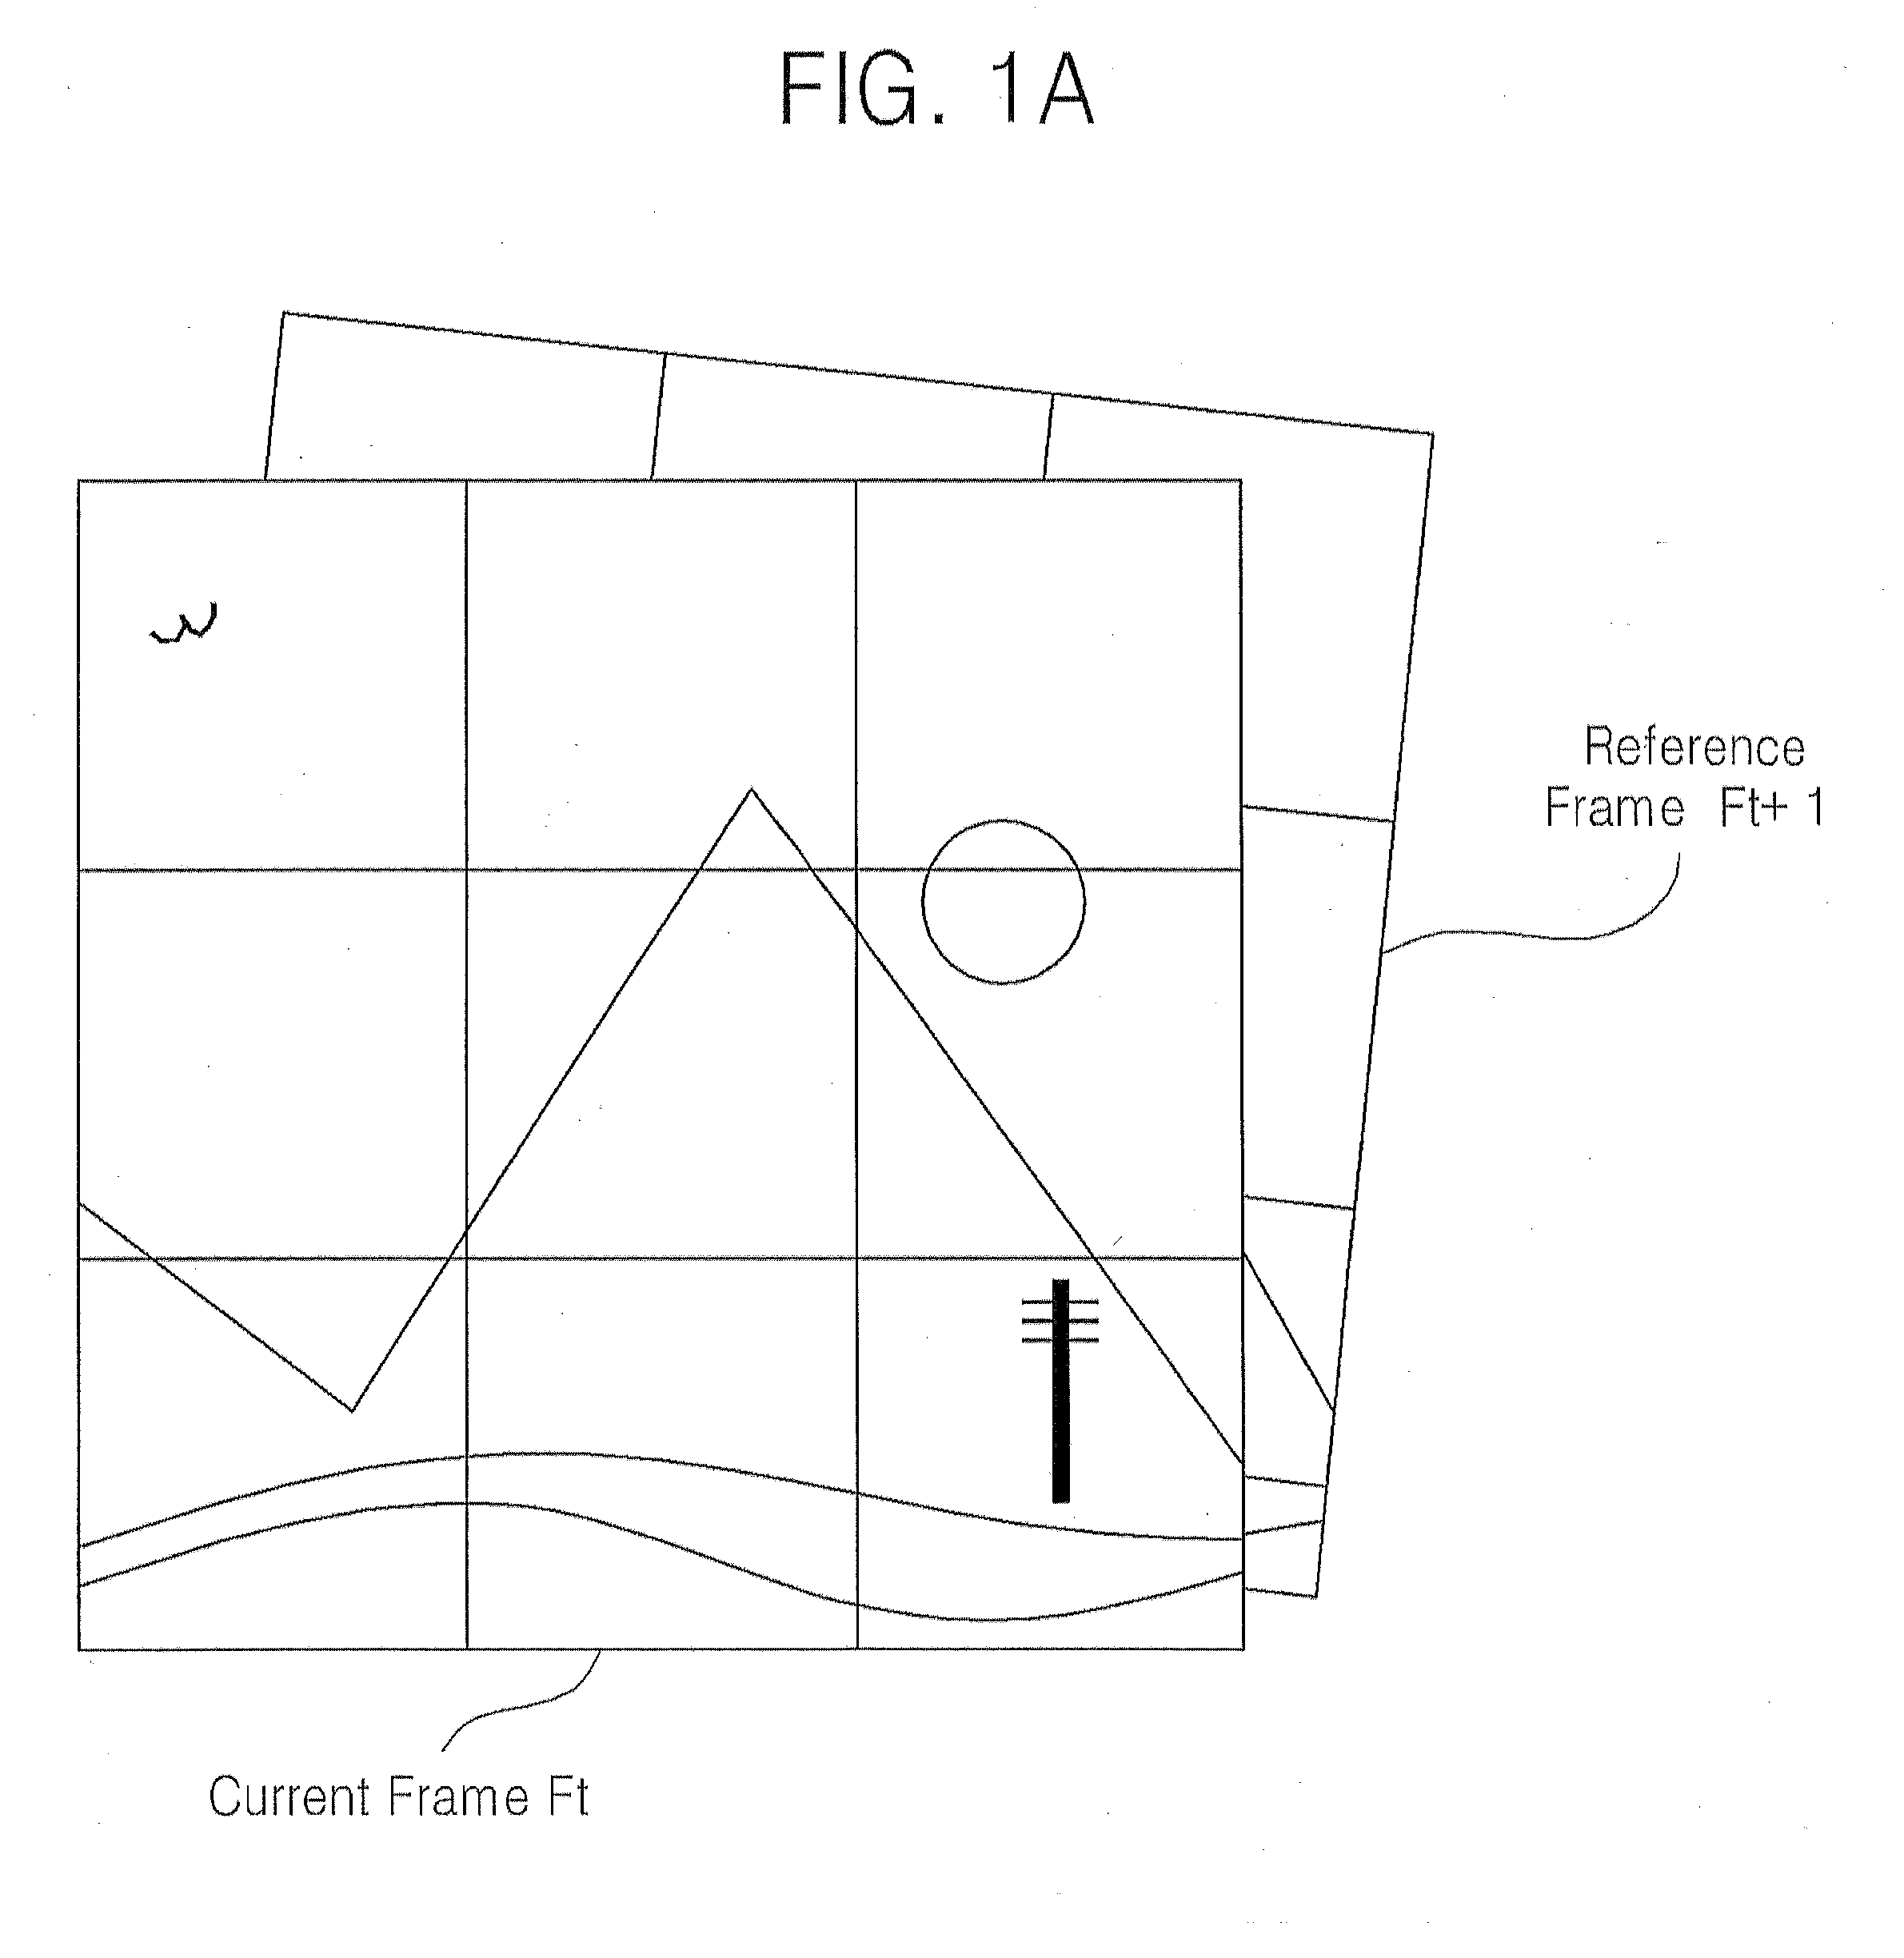 Digital image stabilization device and method